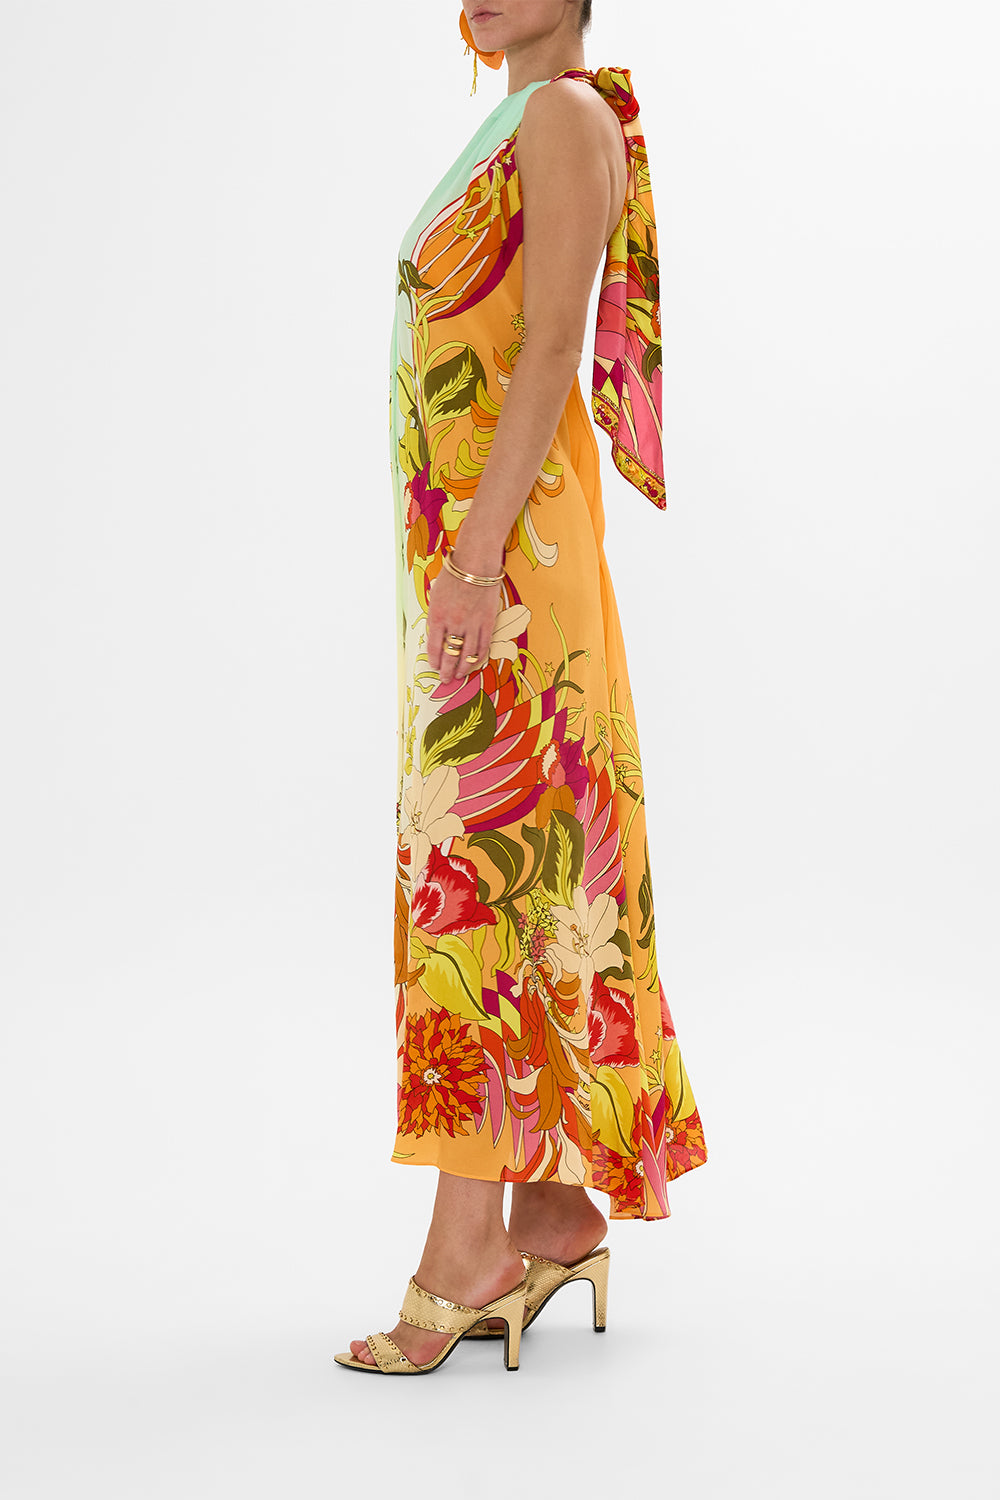 CAMILLA Floral Button Front Opening Dress in The Flower Child Society